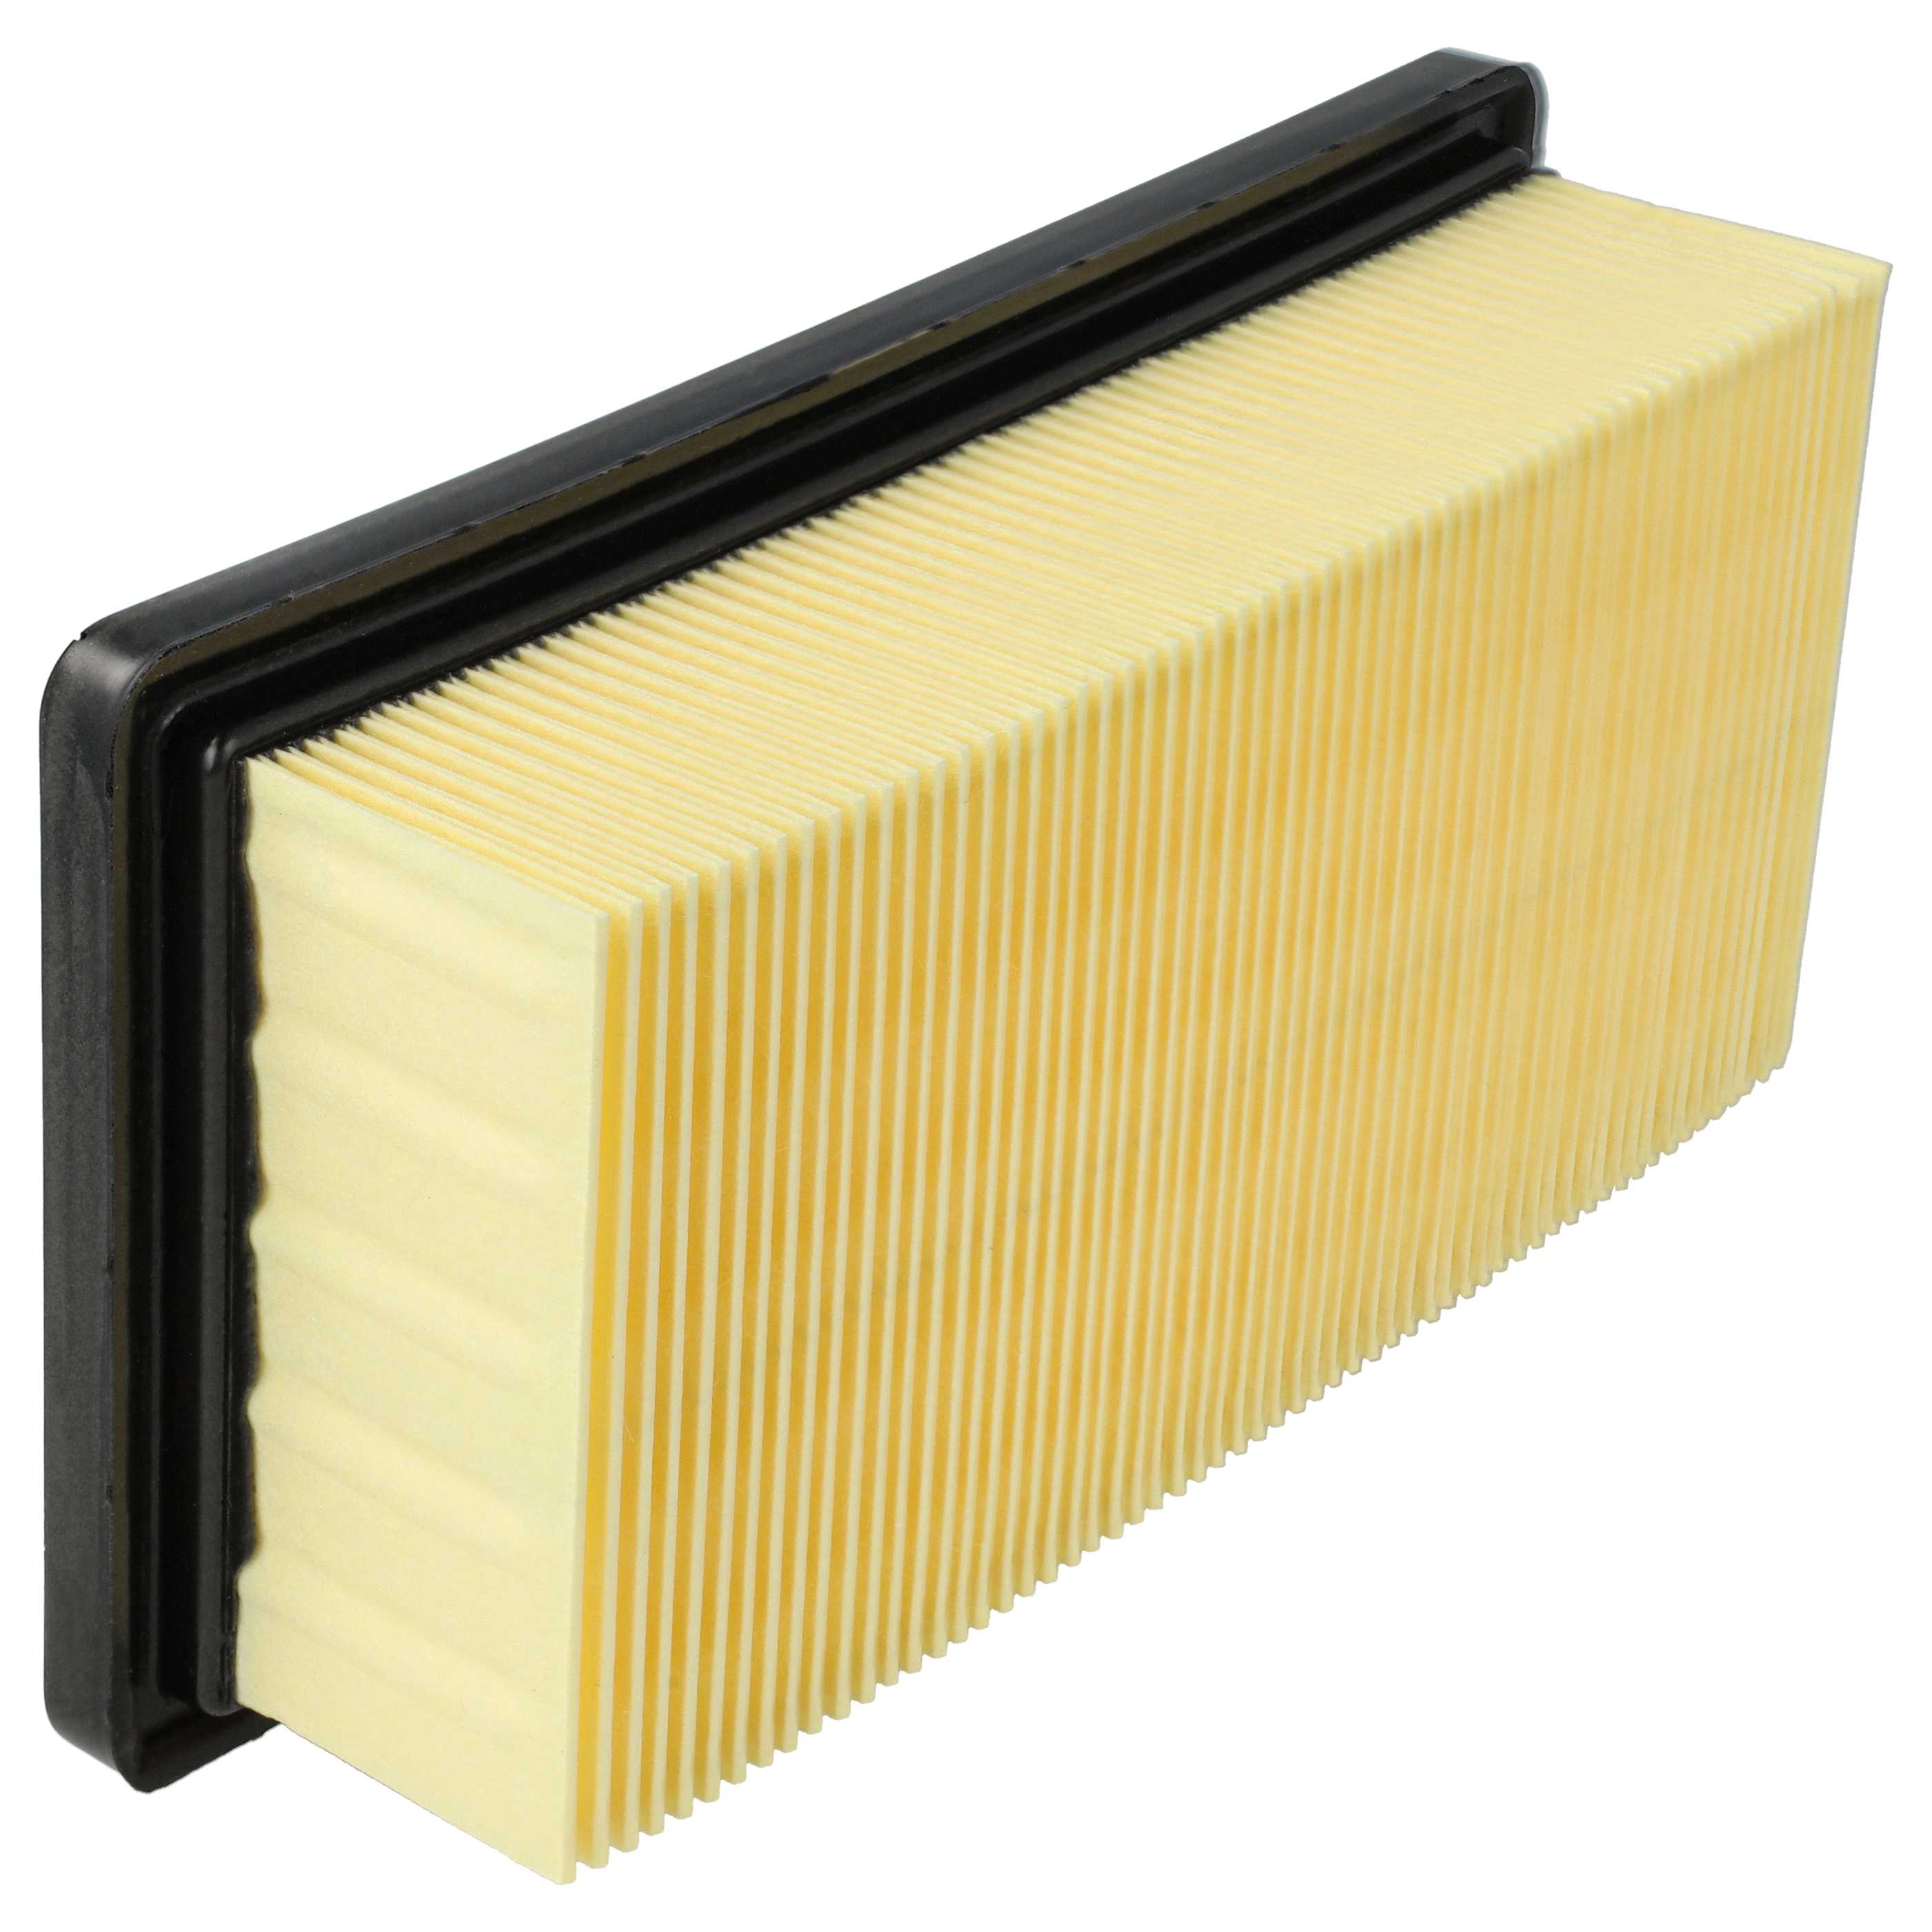 2x flat pleated filter replaces Kärcher 6.414-971.0 for Kärcher Vacuum Cleaner